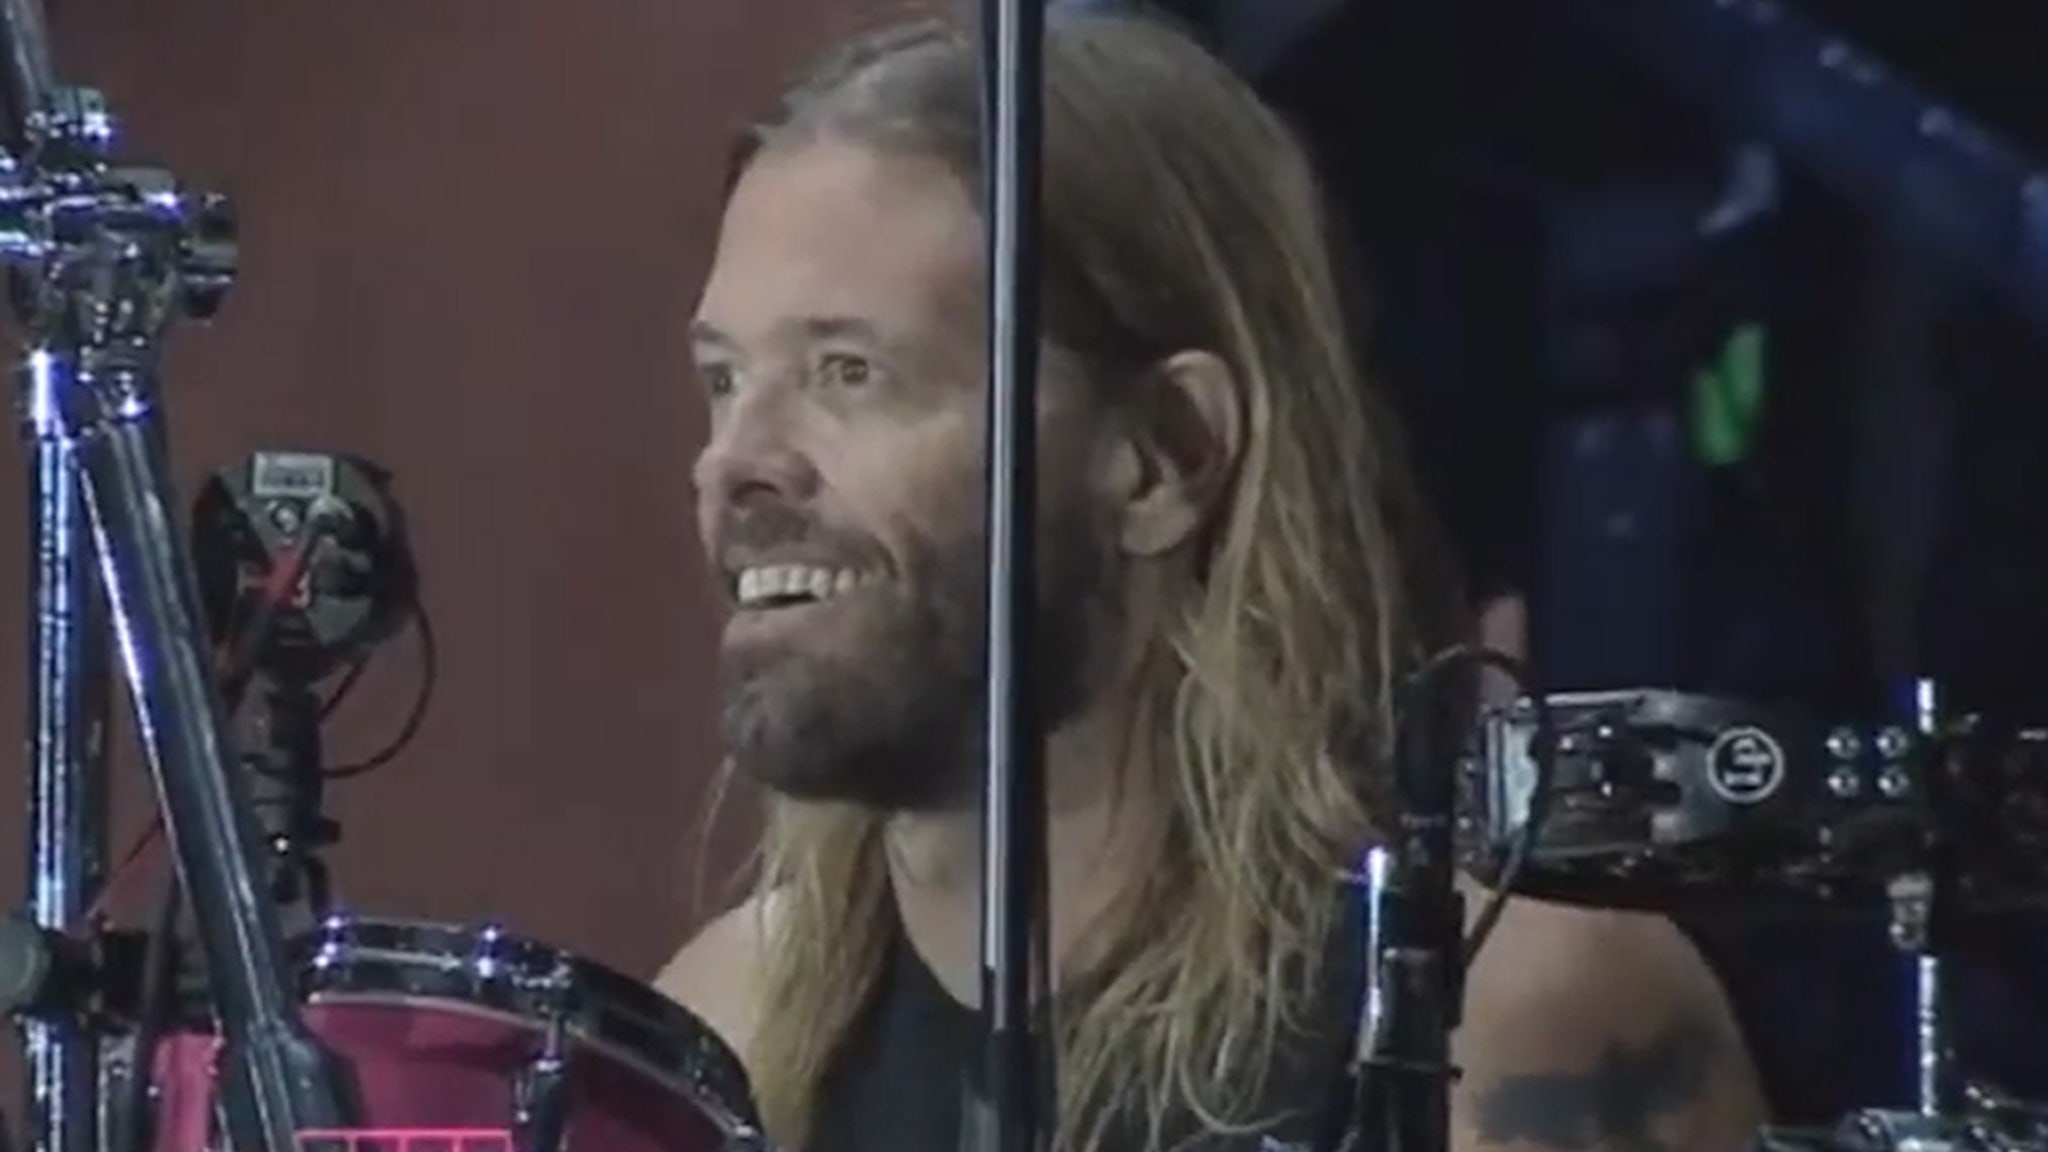 Foo Fighters' Taylor Hawkins Introduced at Lollapalooza by Dave Grohl in Last Vi..